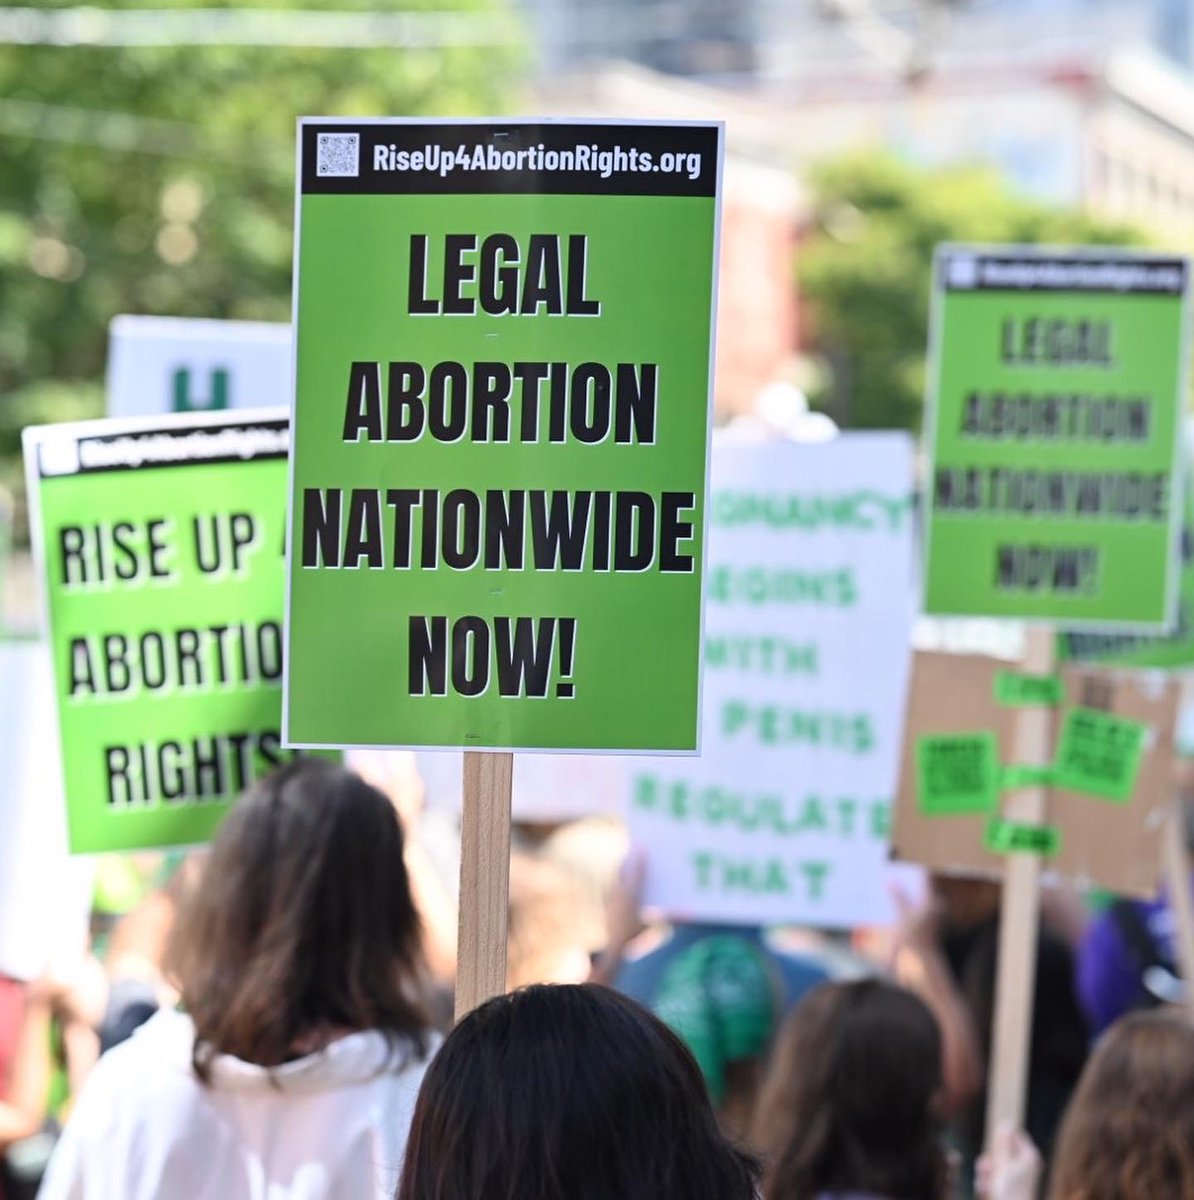 Pretty sure the first step towards #AbortionJustice is LEGAL ABORTION ON DEMAND AND WITHOUT APOLOGY NATIONWIDE

That means EVERY woman and girl can access it in their home state. How? 
#RiseUp4AbortionRights with us. Determined mass resistance needed NOW #RoeVsWade #Aborto